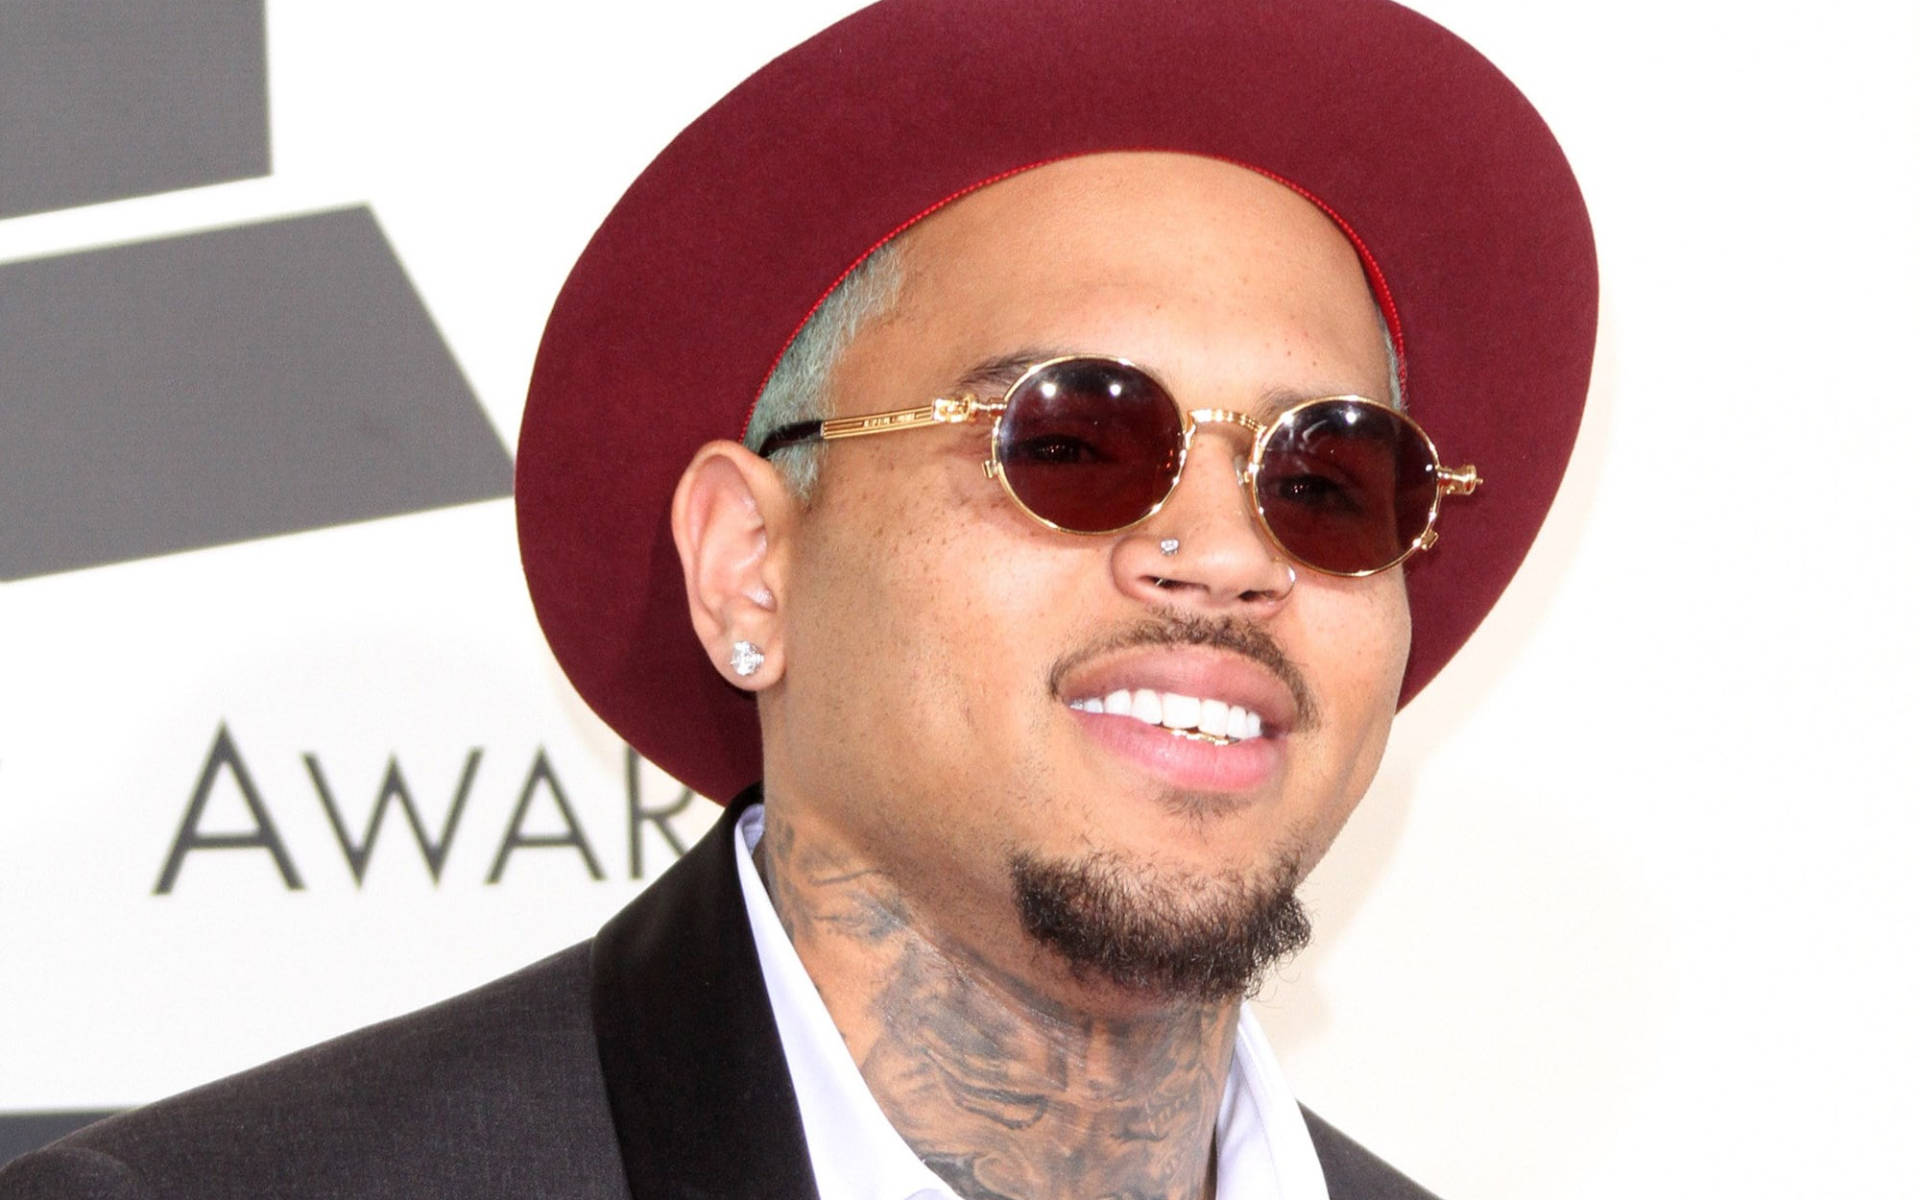 Chris Brown In Awards Event Wallpaper